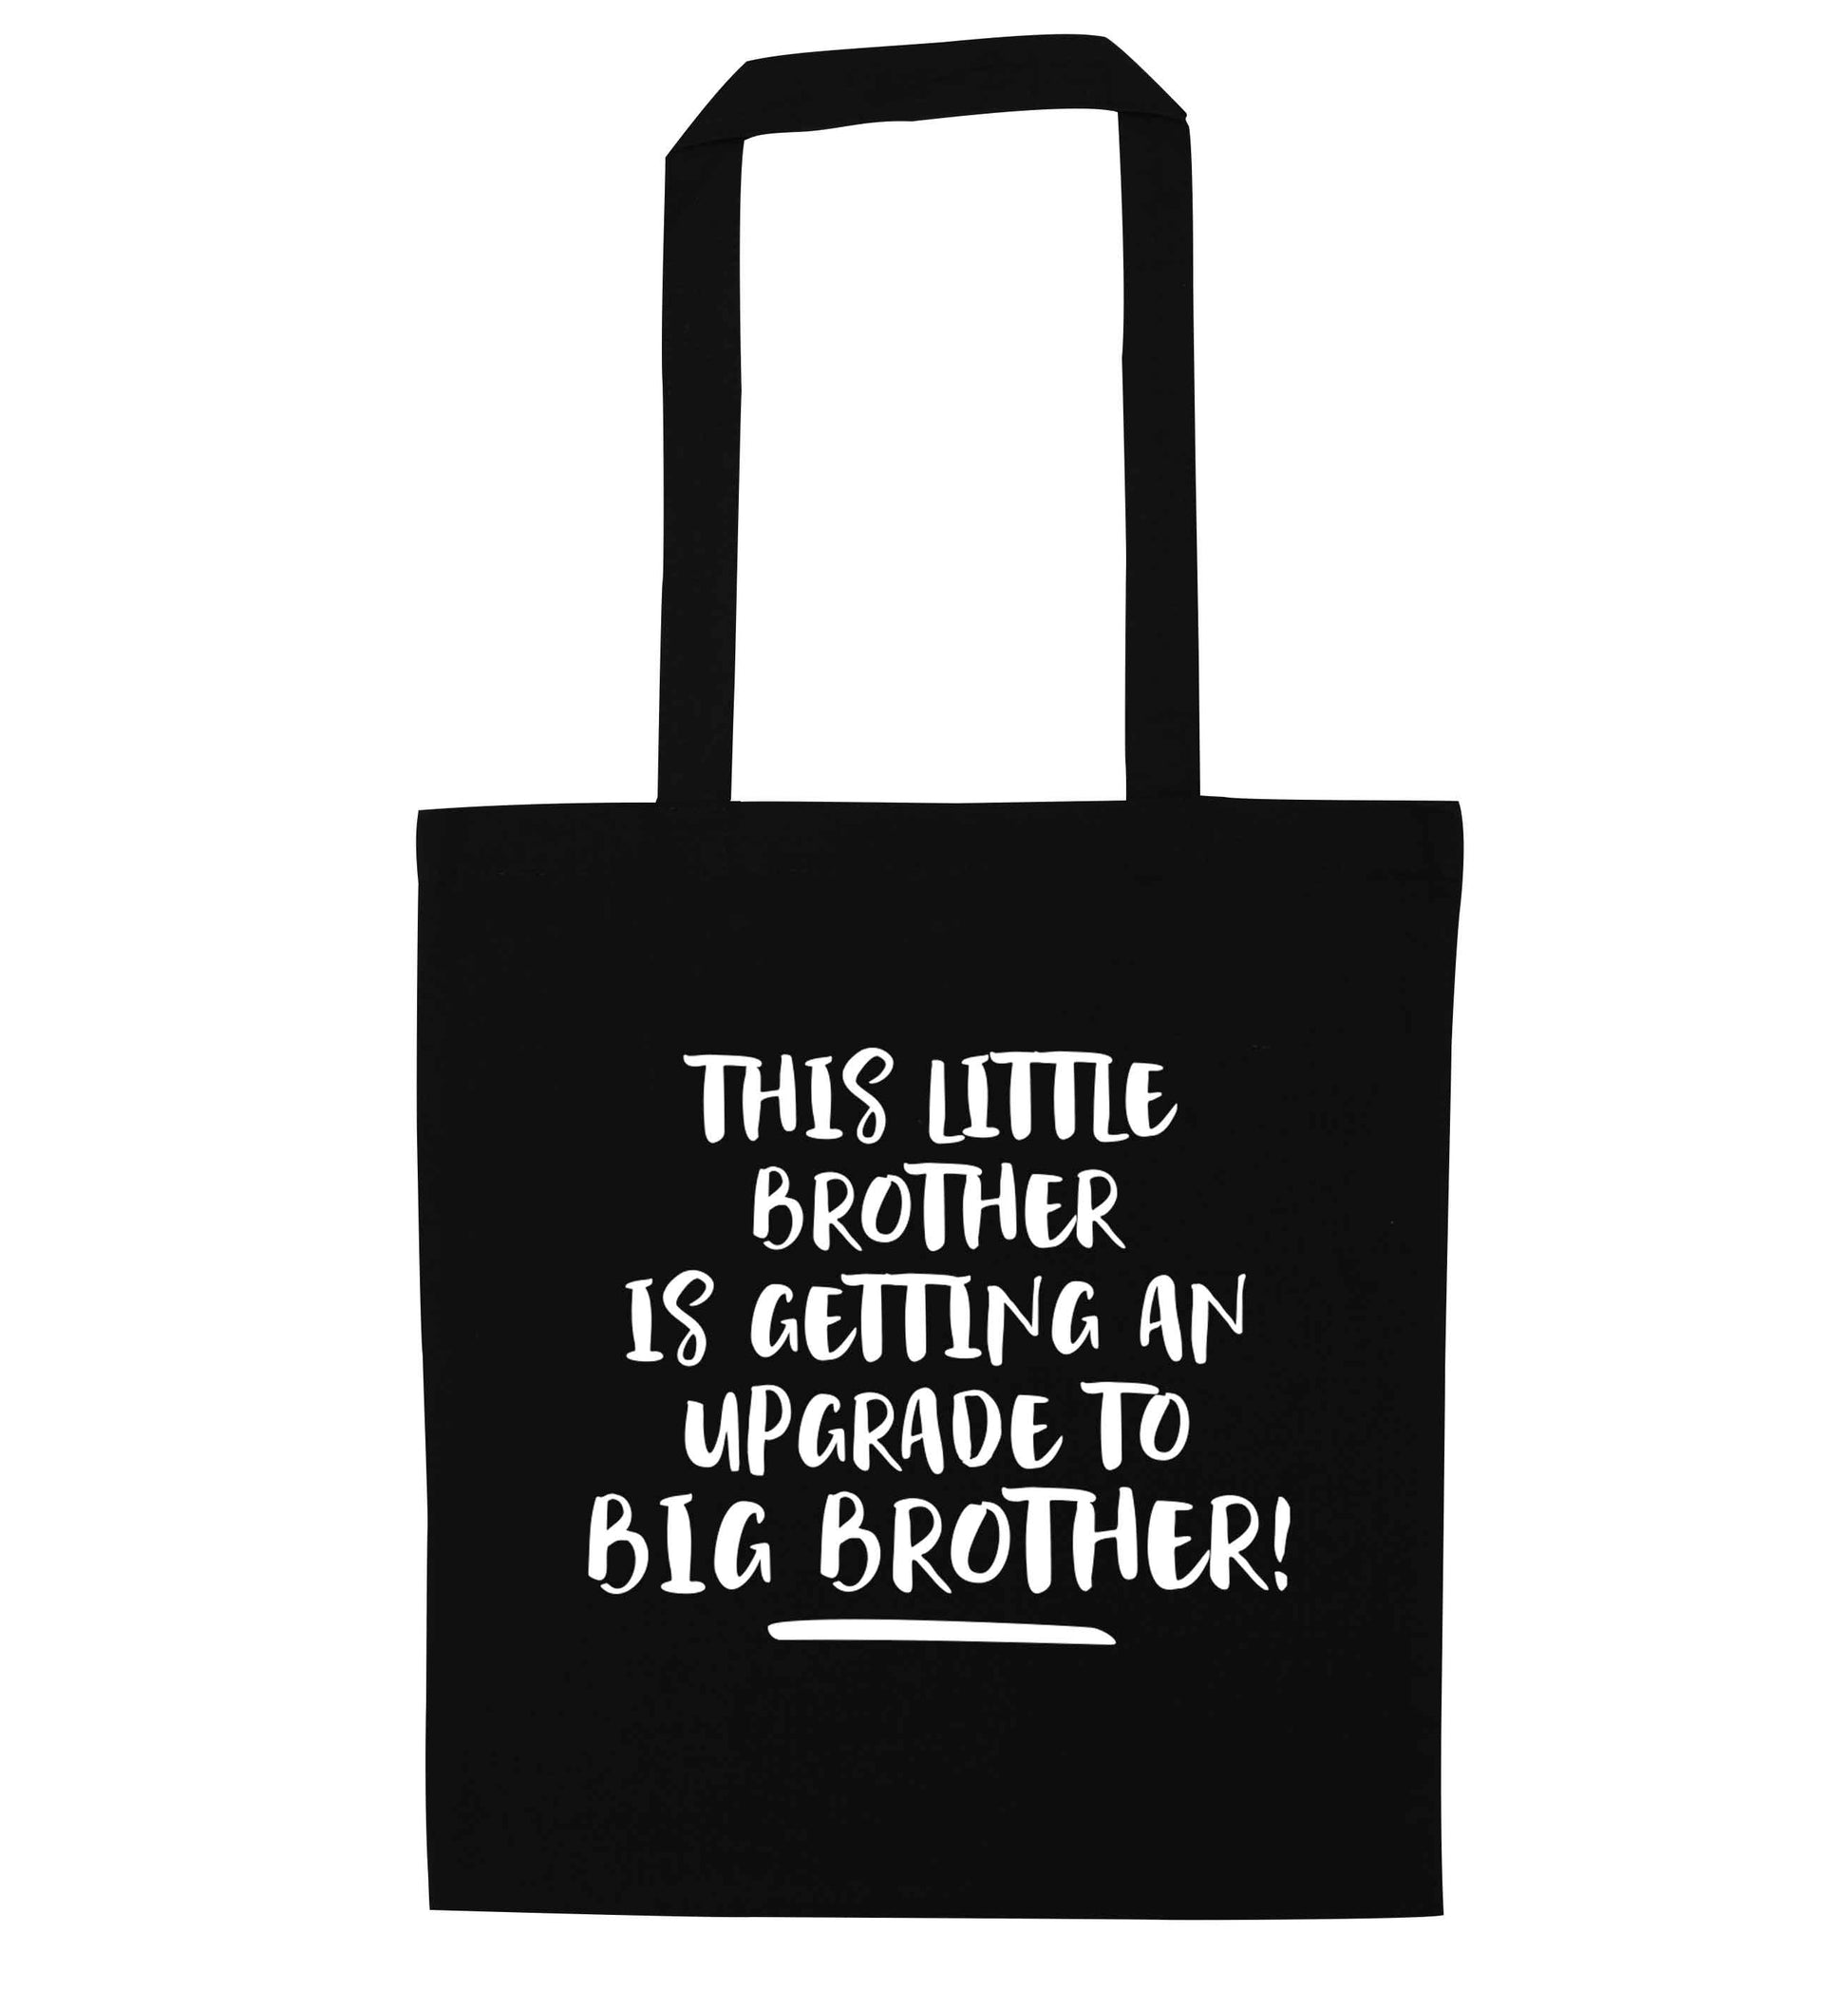 This little brother is getting an upgrade to big brother! black tote bag